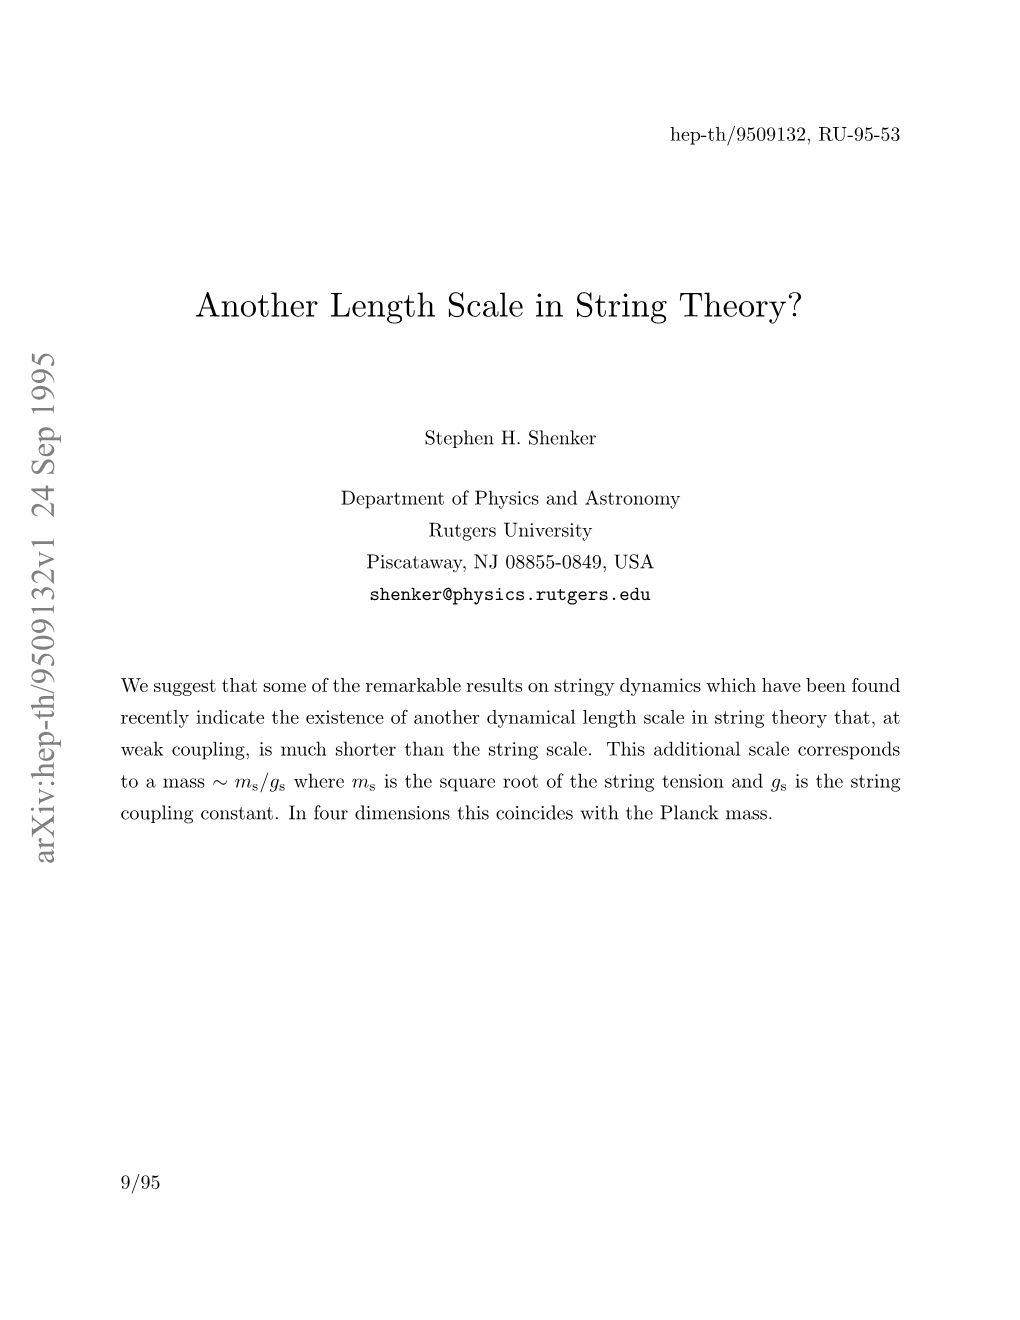 Another Length Scale in String Theory?